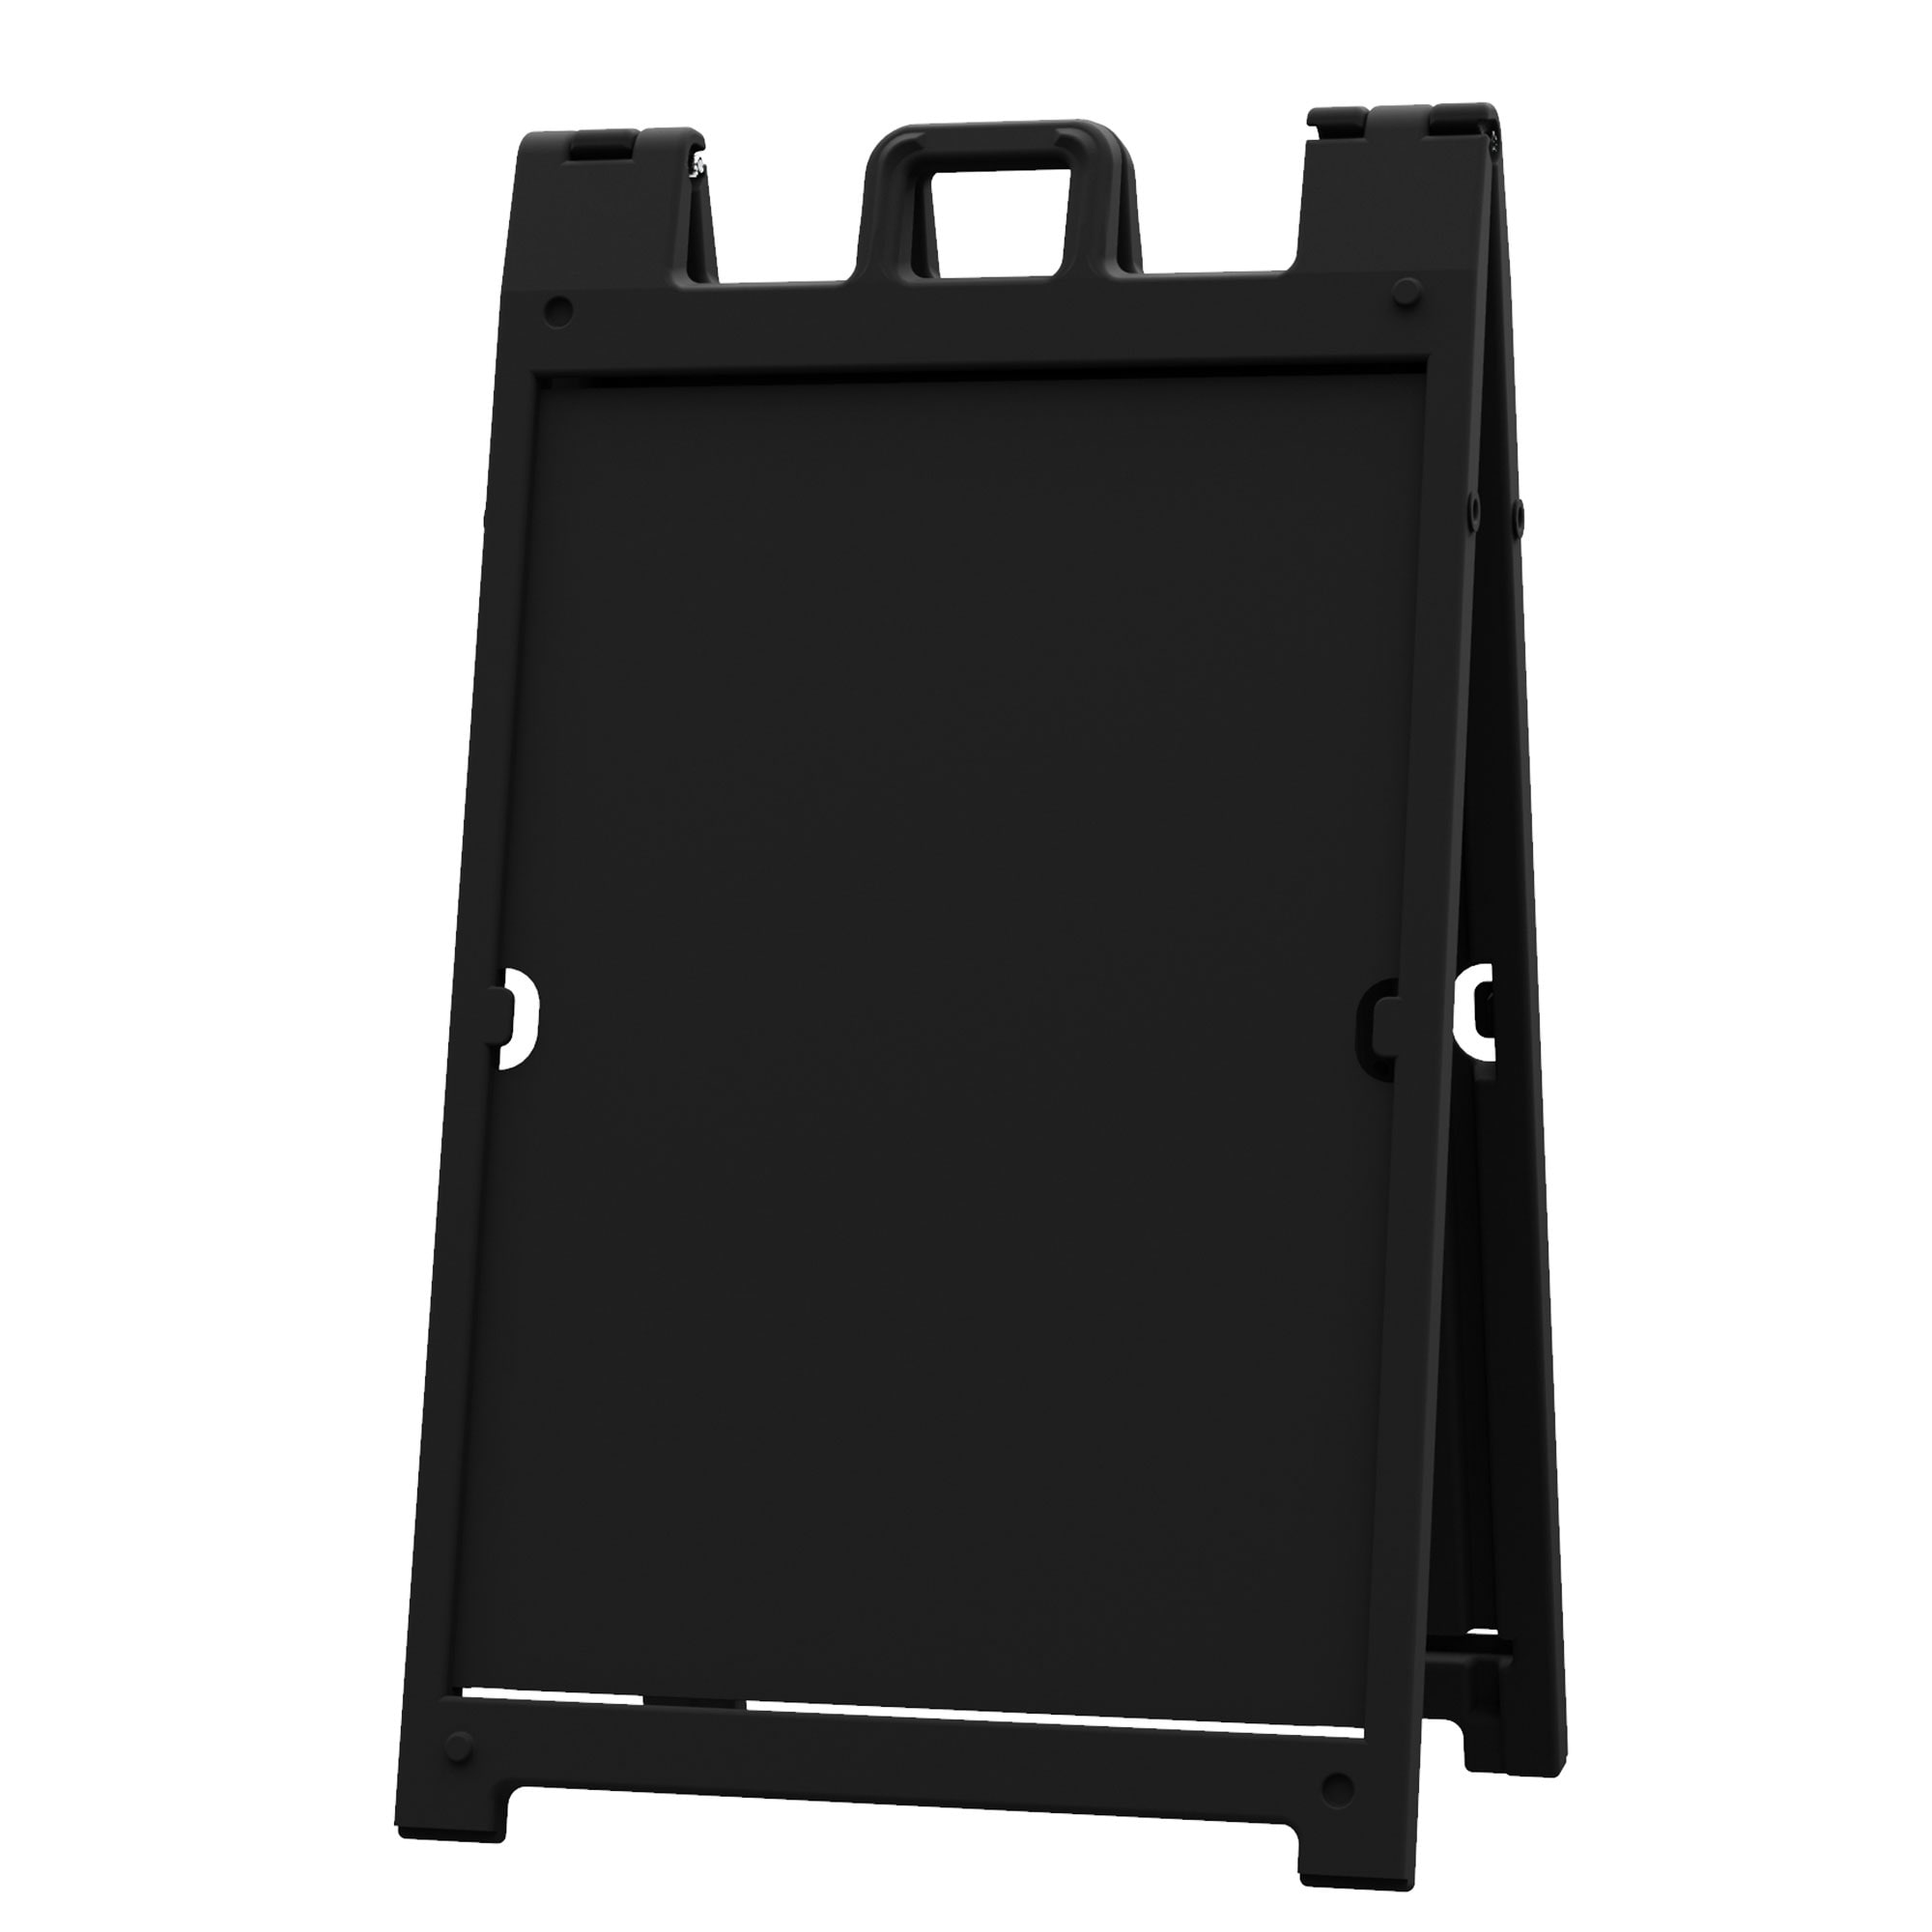 Plasticade Deluxe Signicade Portable Folding Double Sided Sign Stand, Black  20 Bed Bath  Beyond 35306292